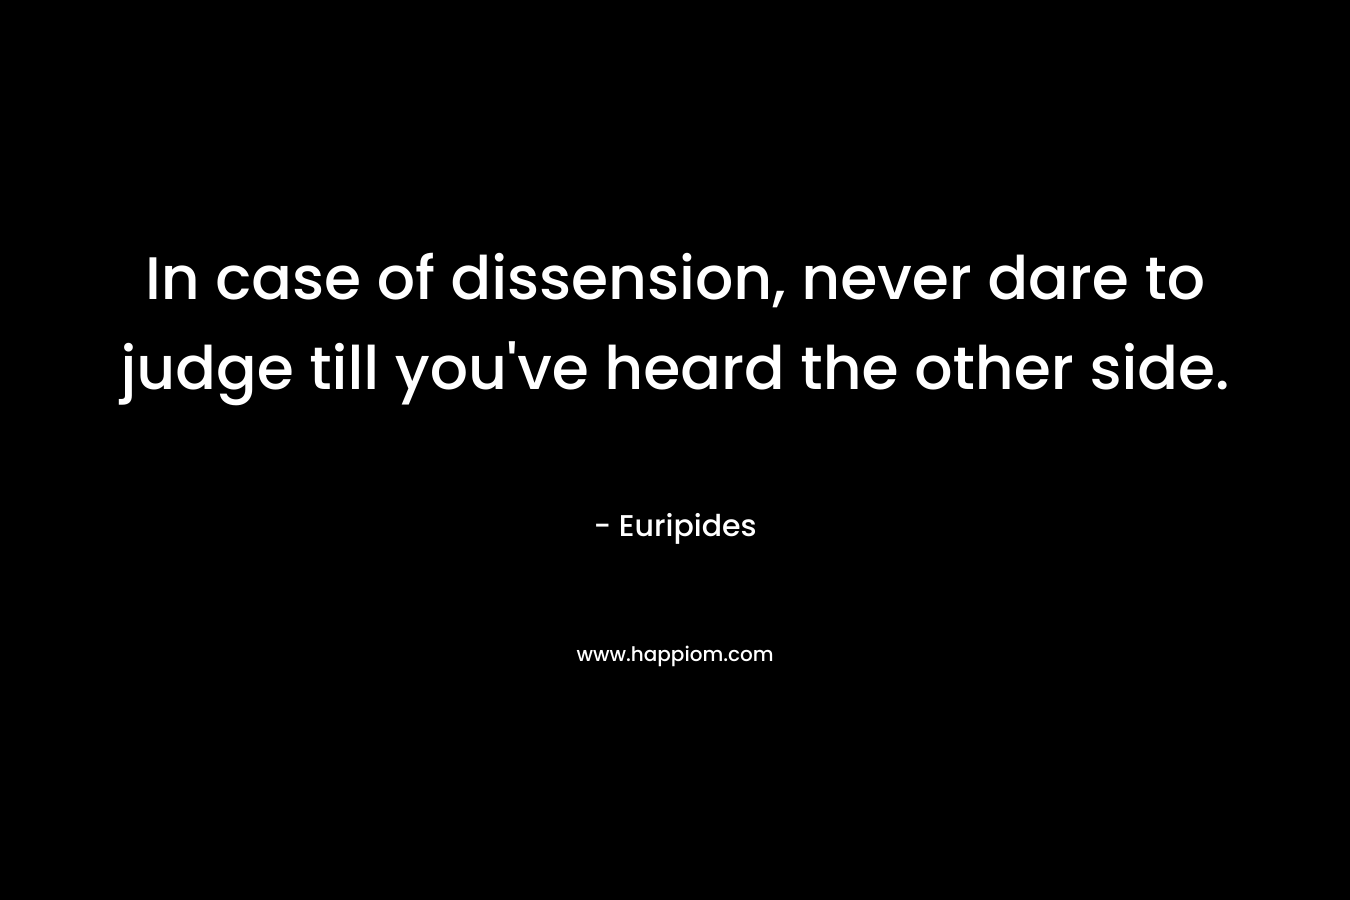 In case of dissension, never dare to judge till you’ve heard the other side. – Euripides